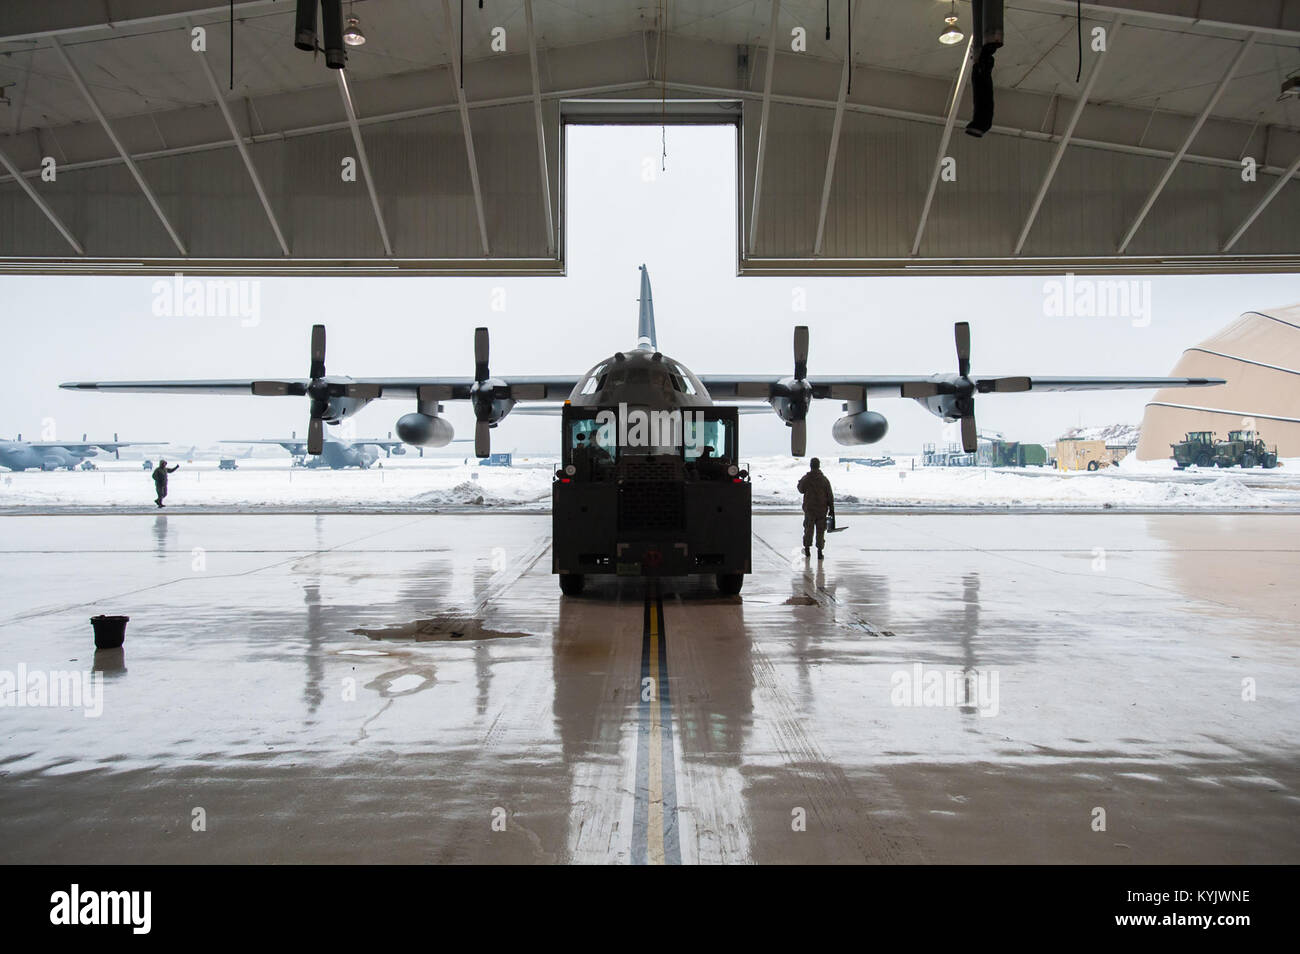 Members of the 123rd Aircraft Maintenance Squadron push a C-130 Hercules aircraft from a hangar at the Kentucky Air National Guard Base in Louisville, Ky., Feb. 21, 2015. The aircraft, which subsequently departed for the Persian Gulf along with 37 deploying Kentucky Air Guardsmen, was being housed in the hangar because of severe weather conditions. (U.S. Air National Guard photo by Maj. Dale Greer) Stock Photo